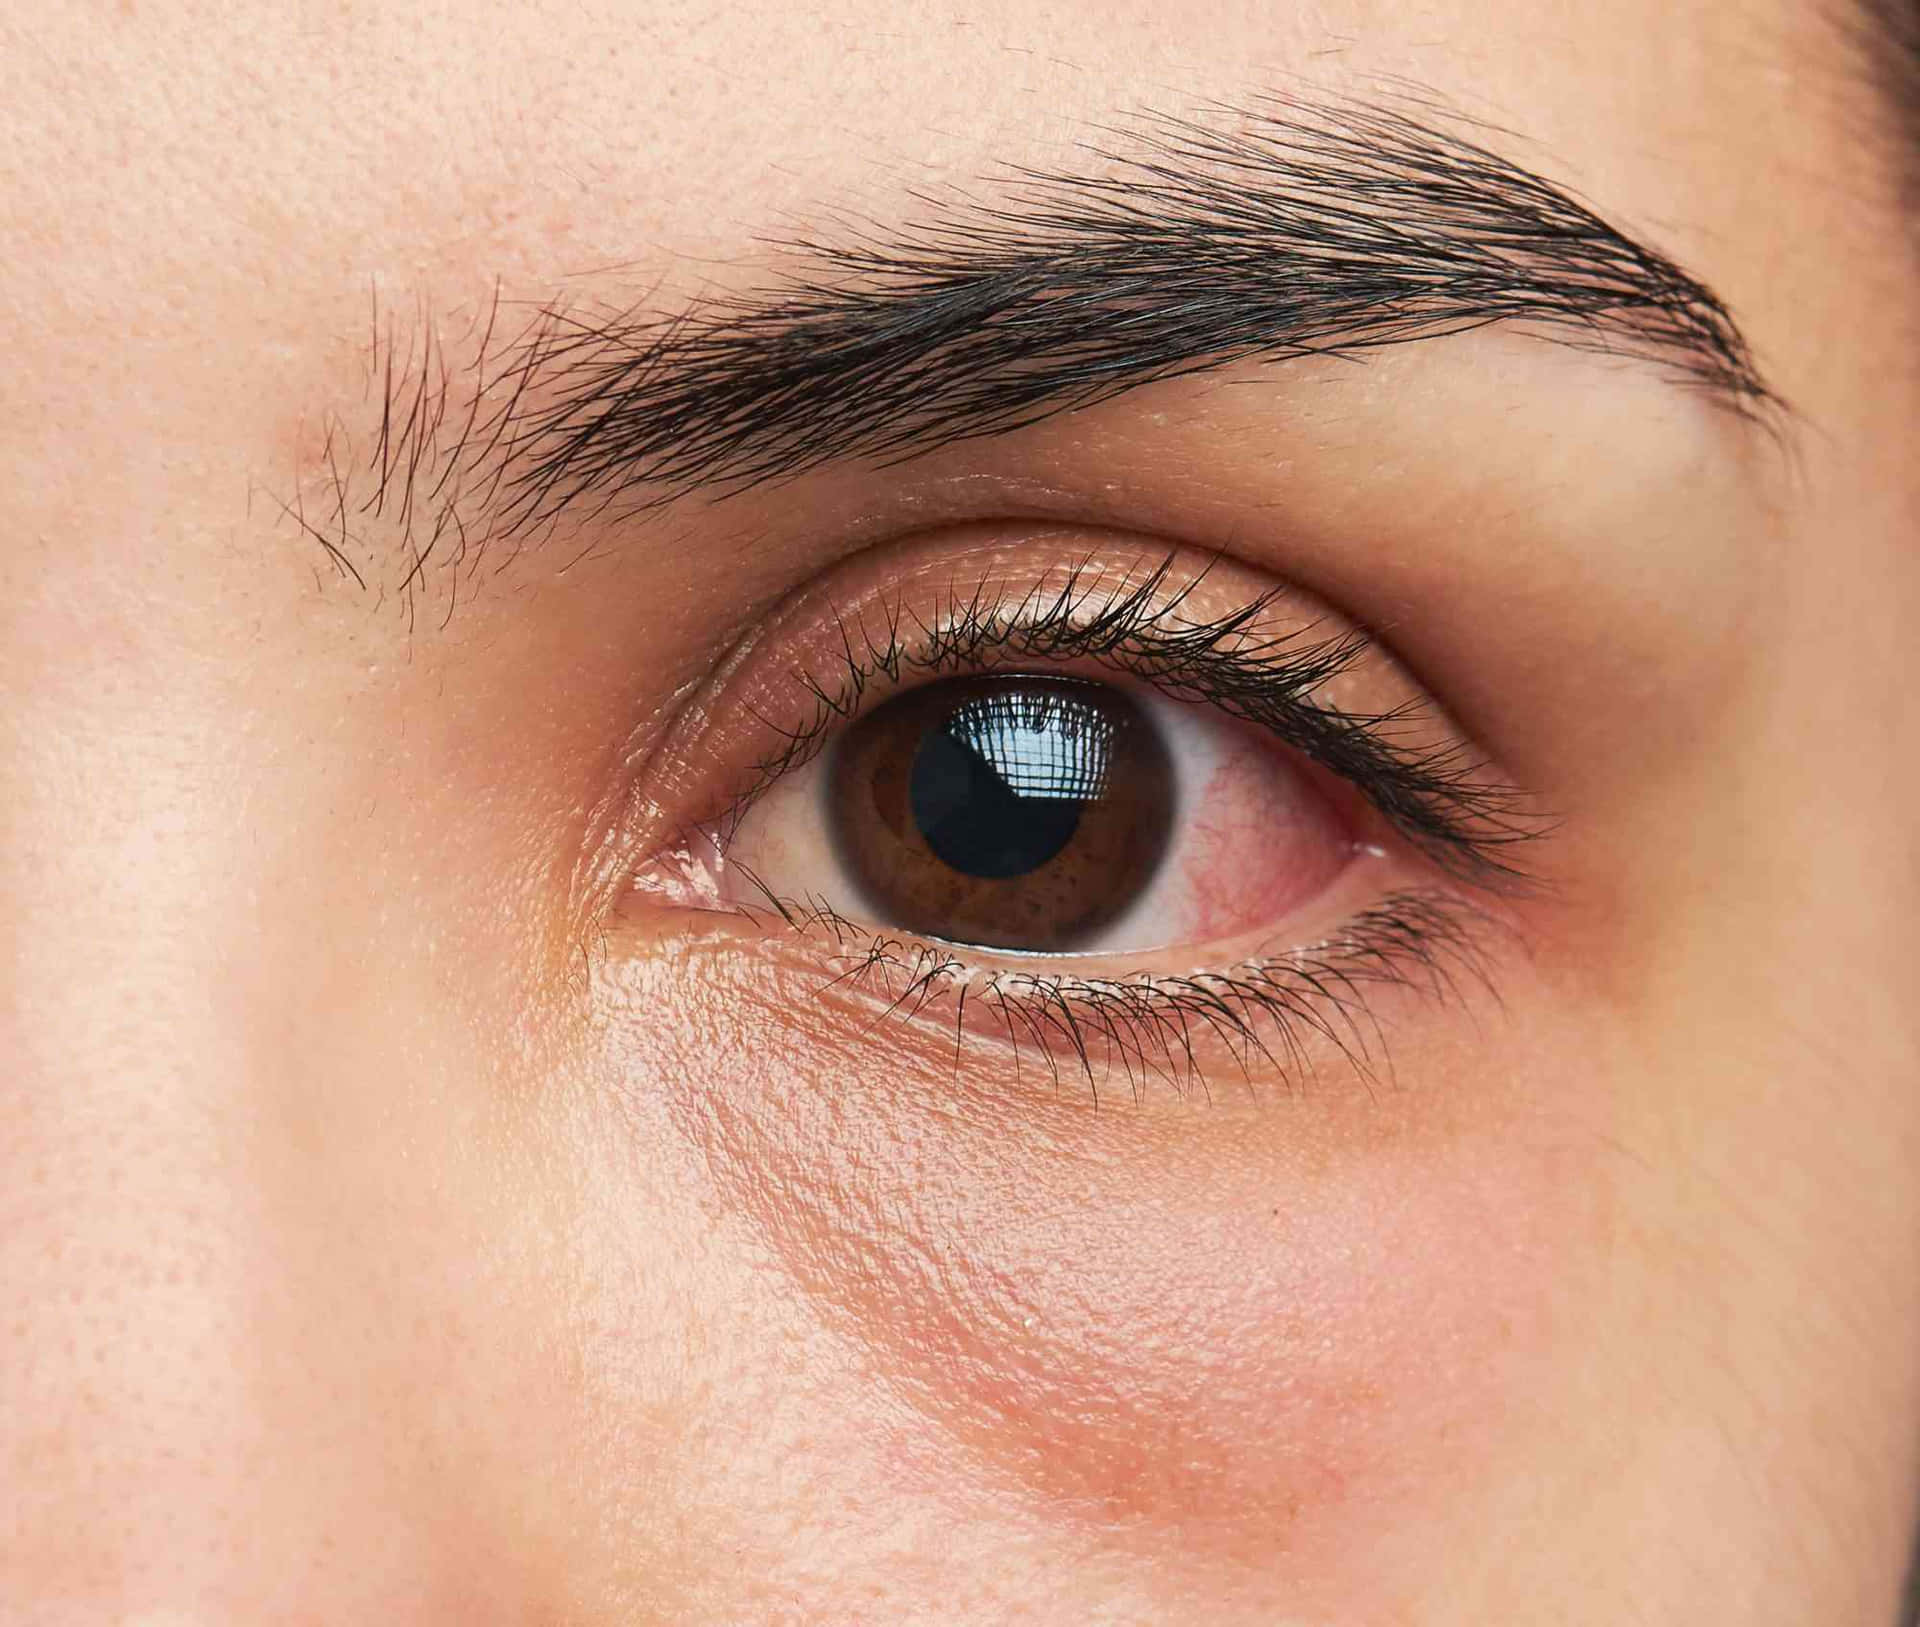 A Woman's Eye With Redness And Swelling